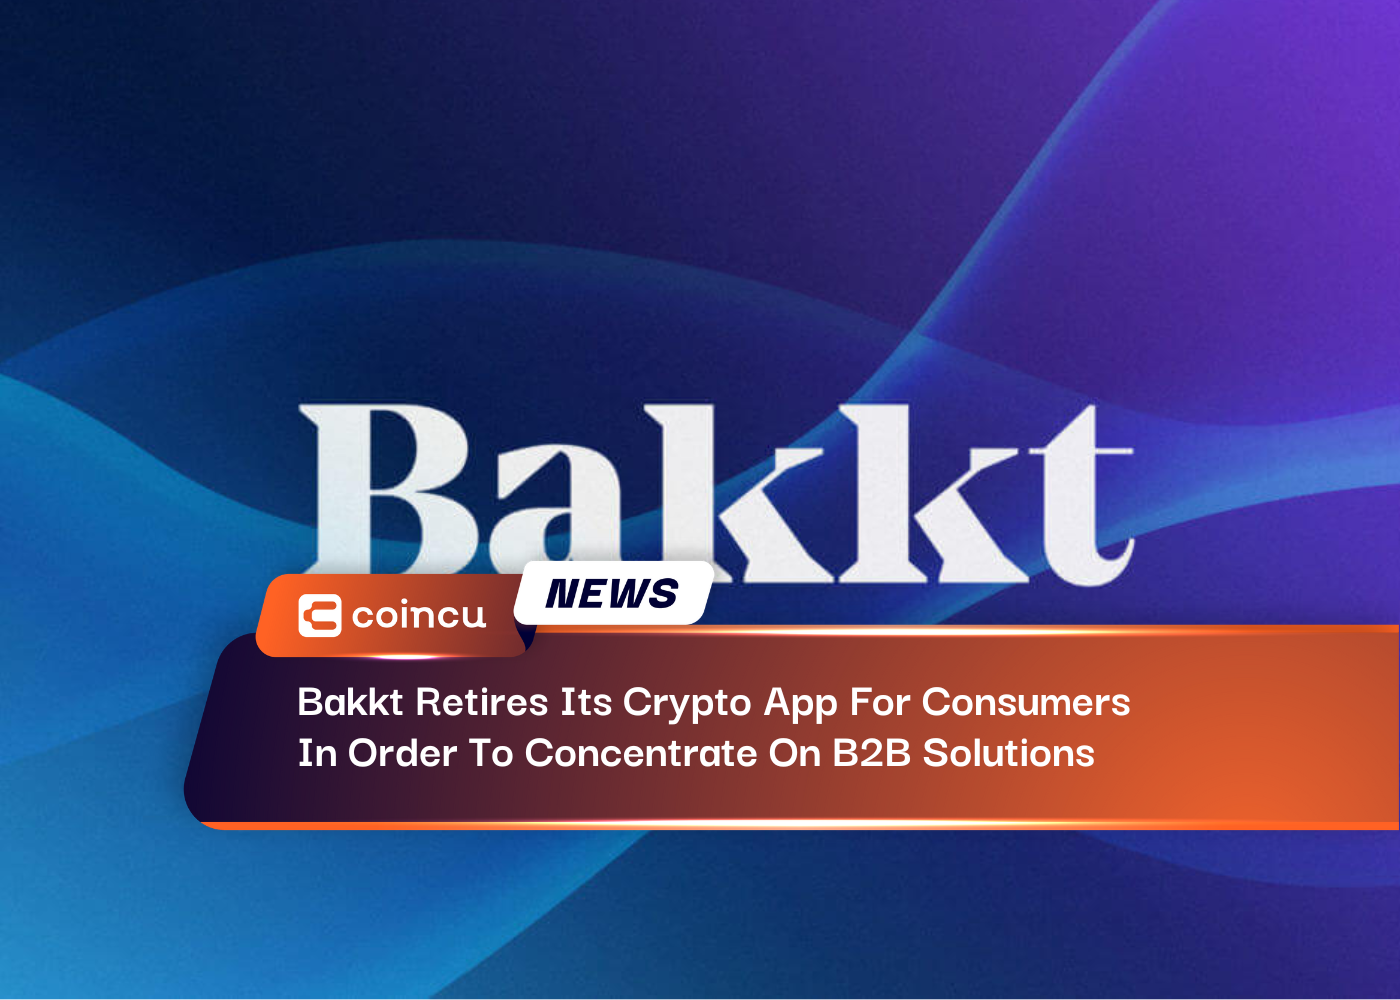 Bakkt Retires Its Crypto App For Consumers